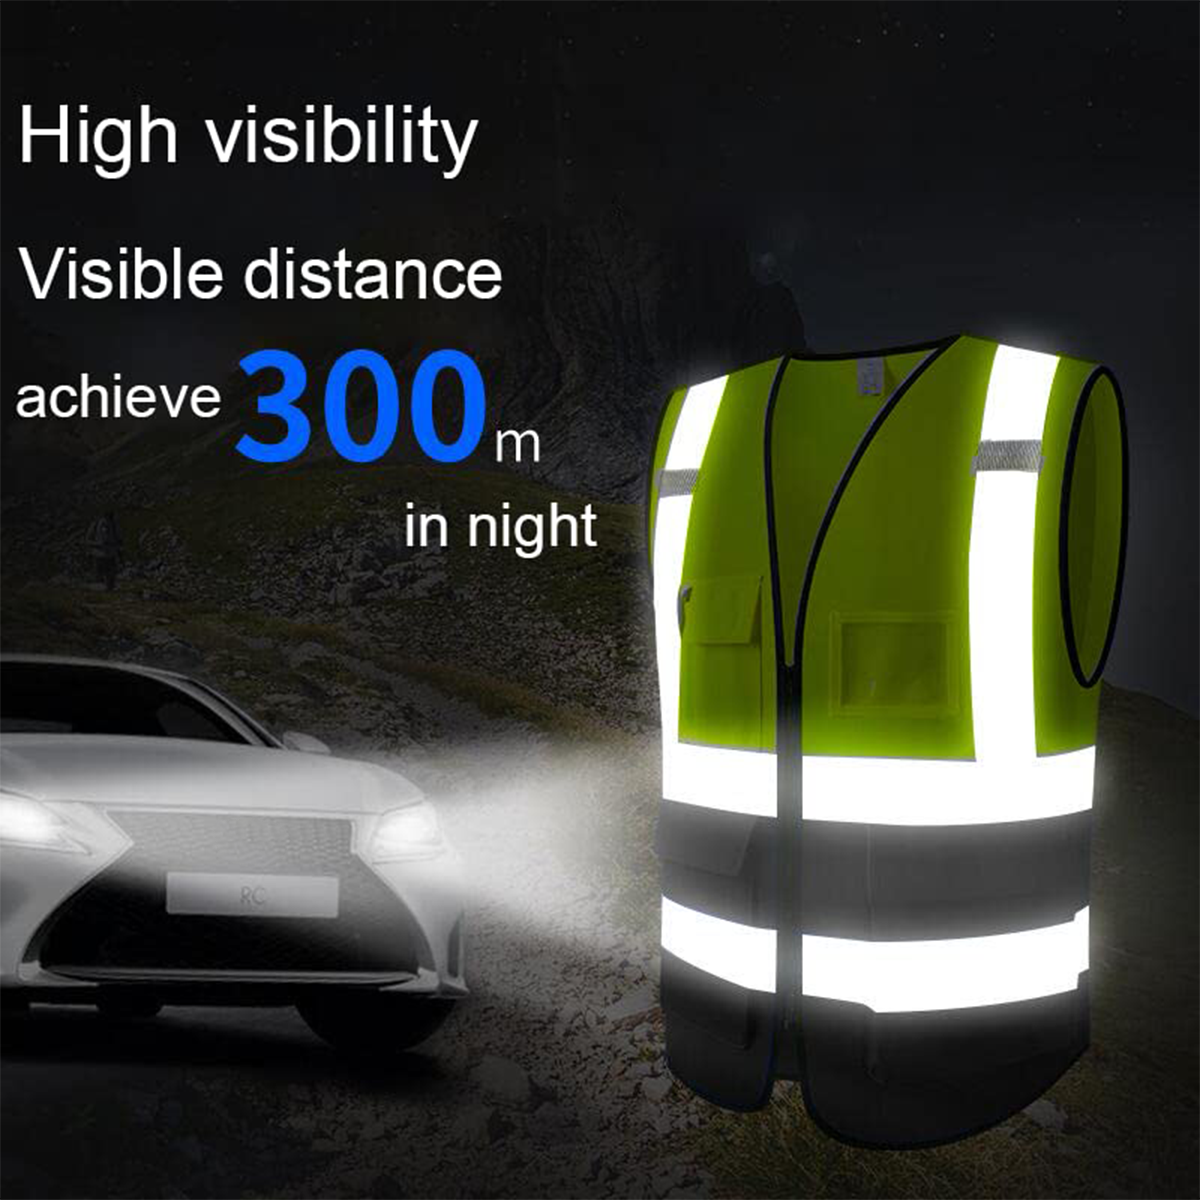 safety vest visibility visible achieve distance 300m in night